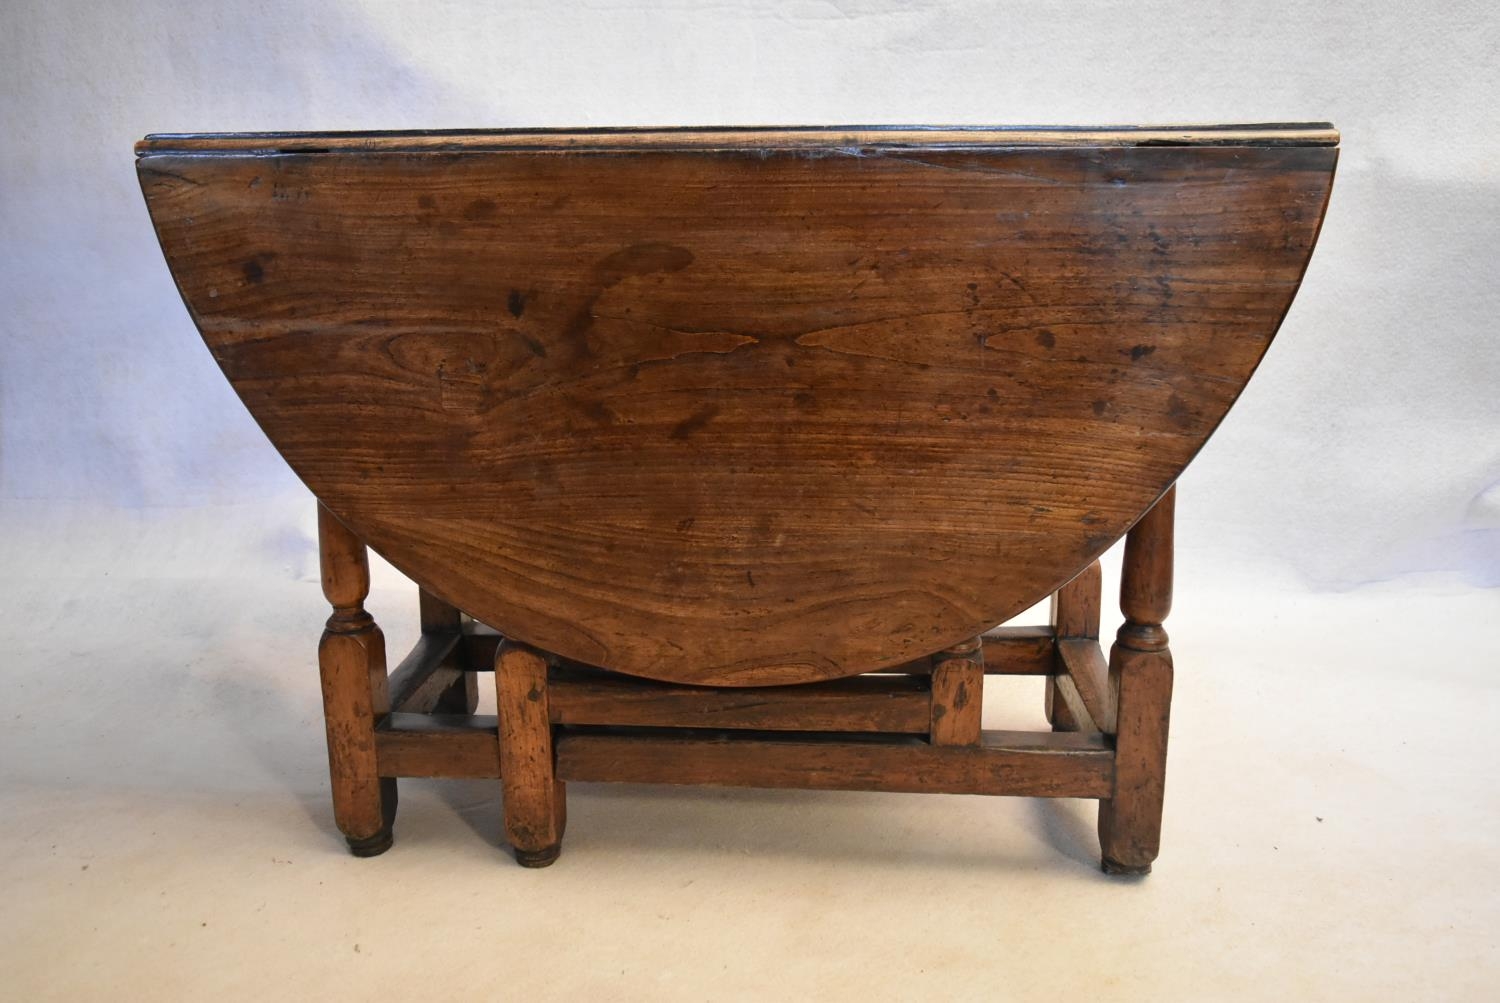 An 18th century country oak gateleg dining table with frieze drawer above turned stretchered